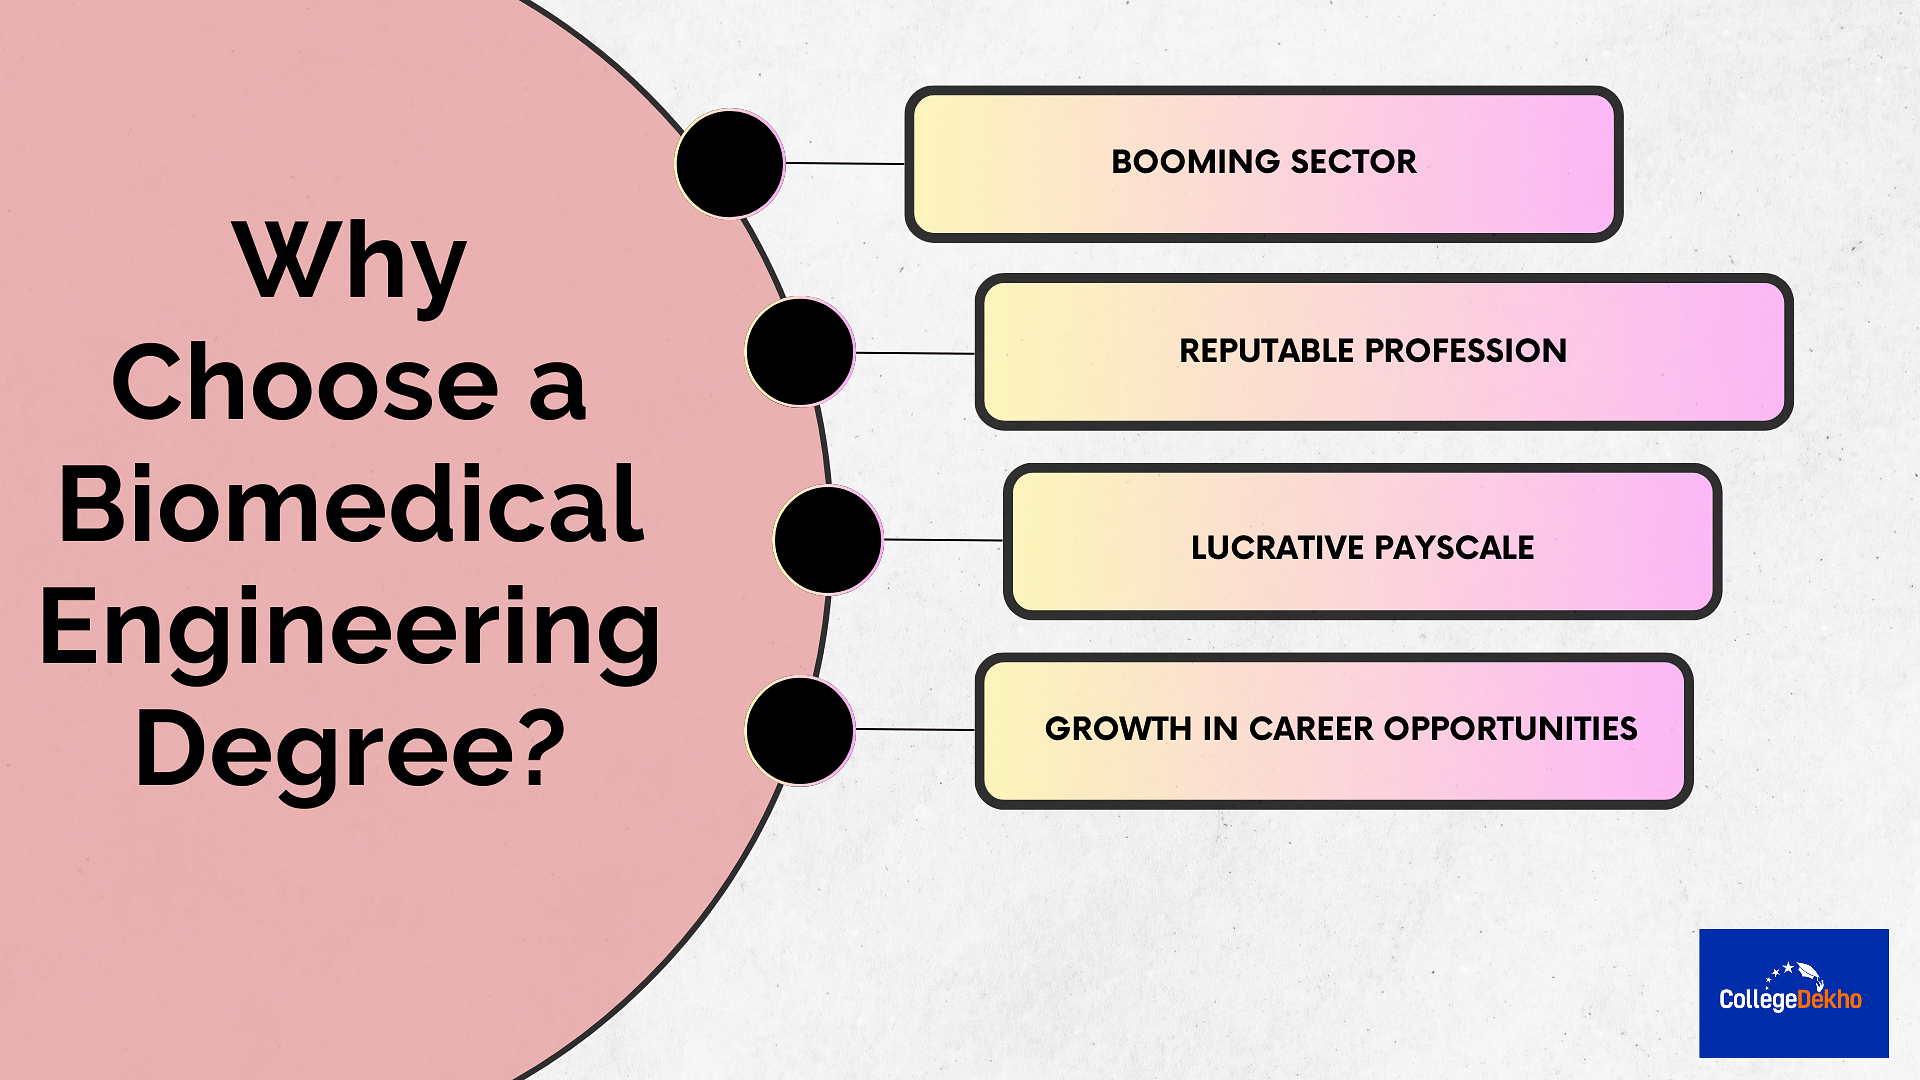 Why Choose a Biomedical Engineering Degree?